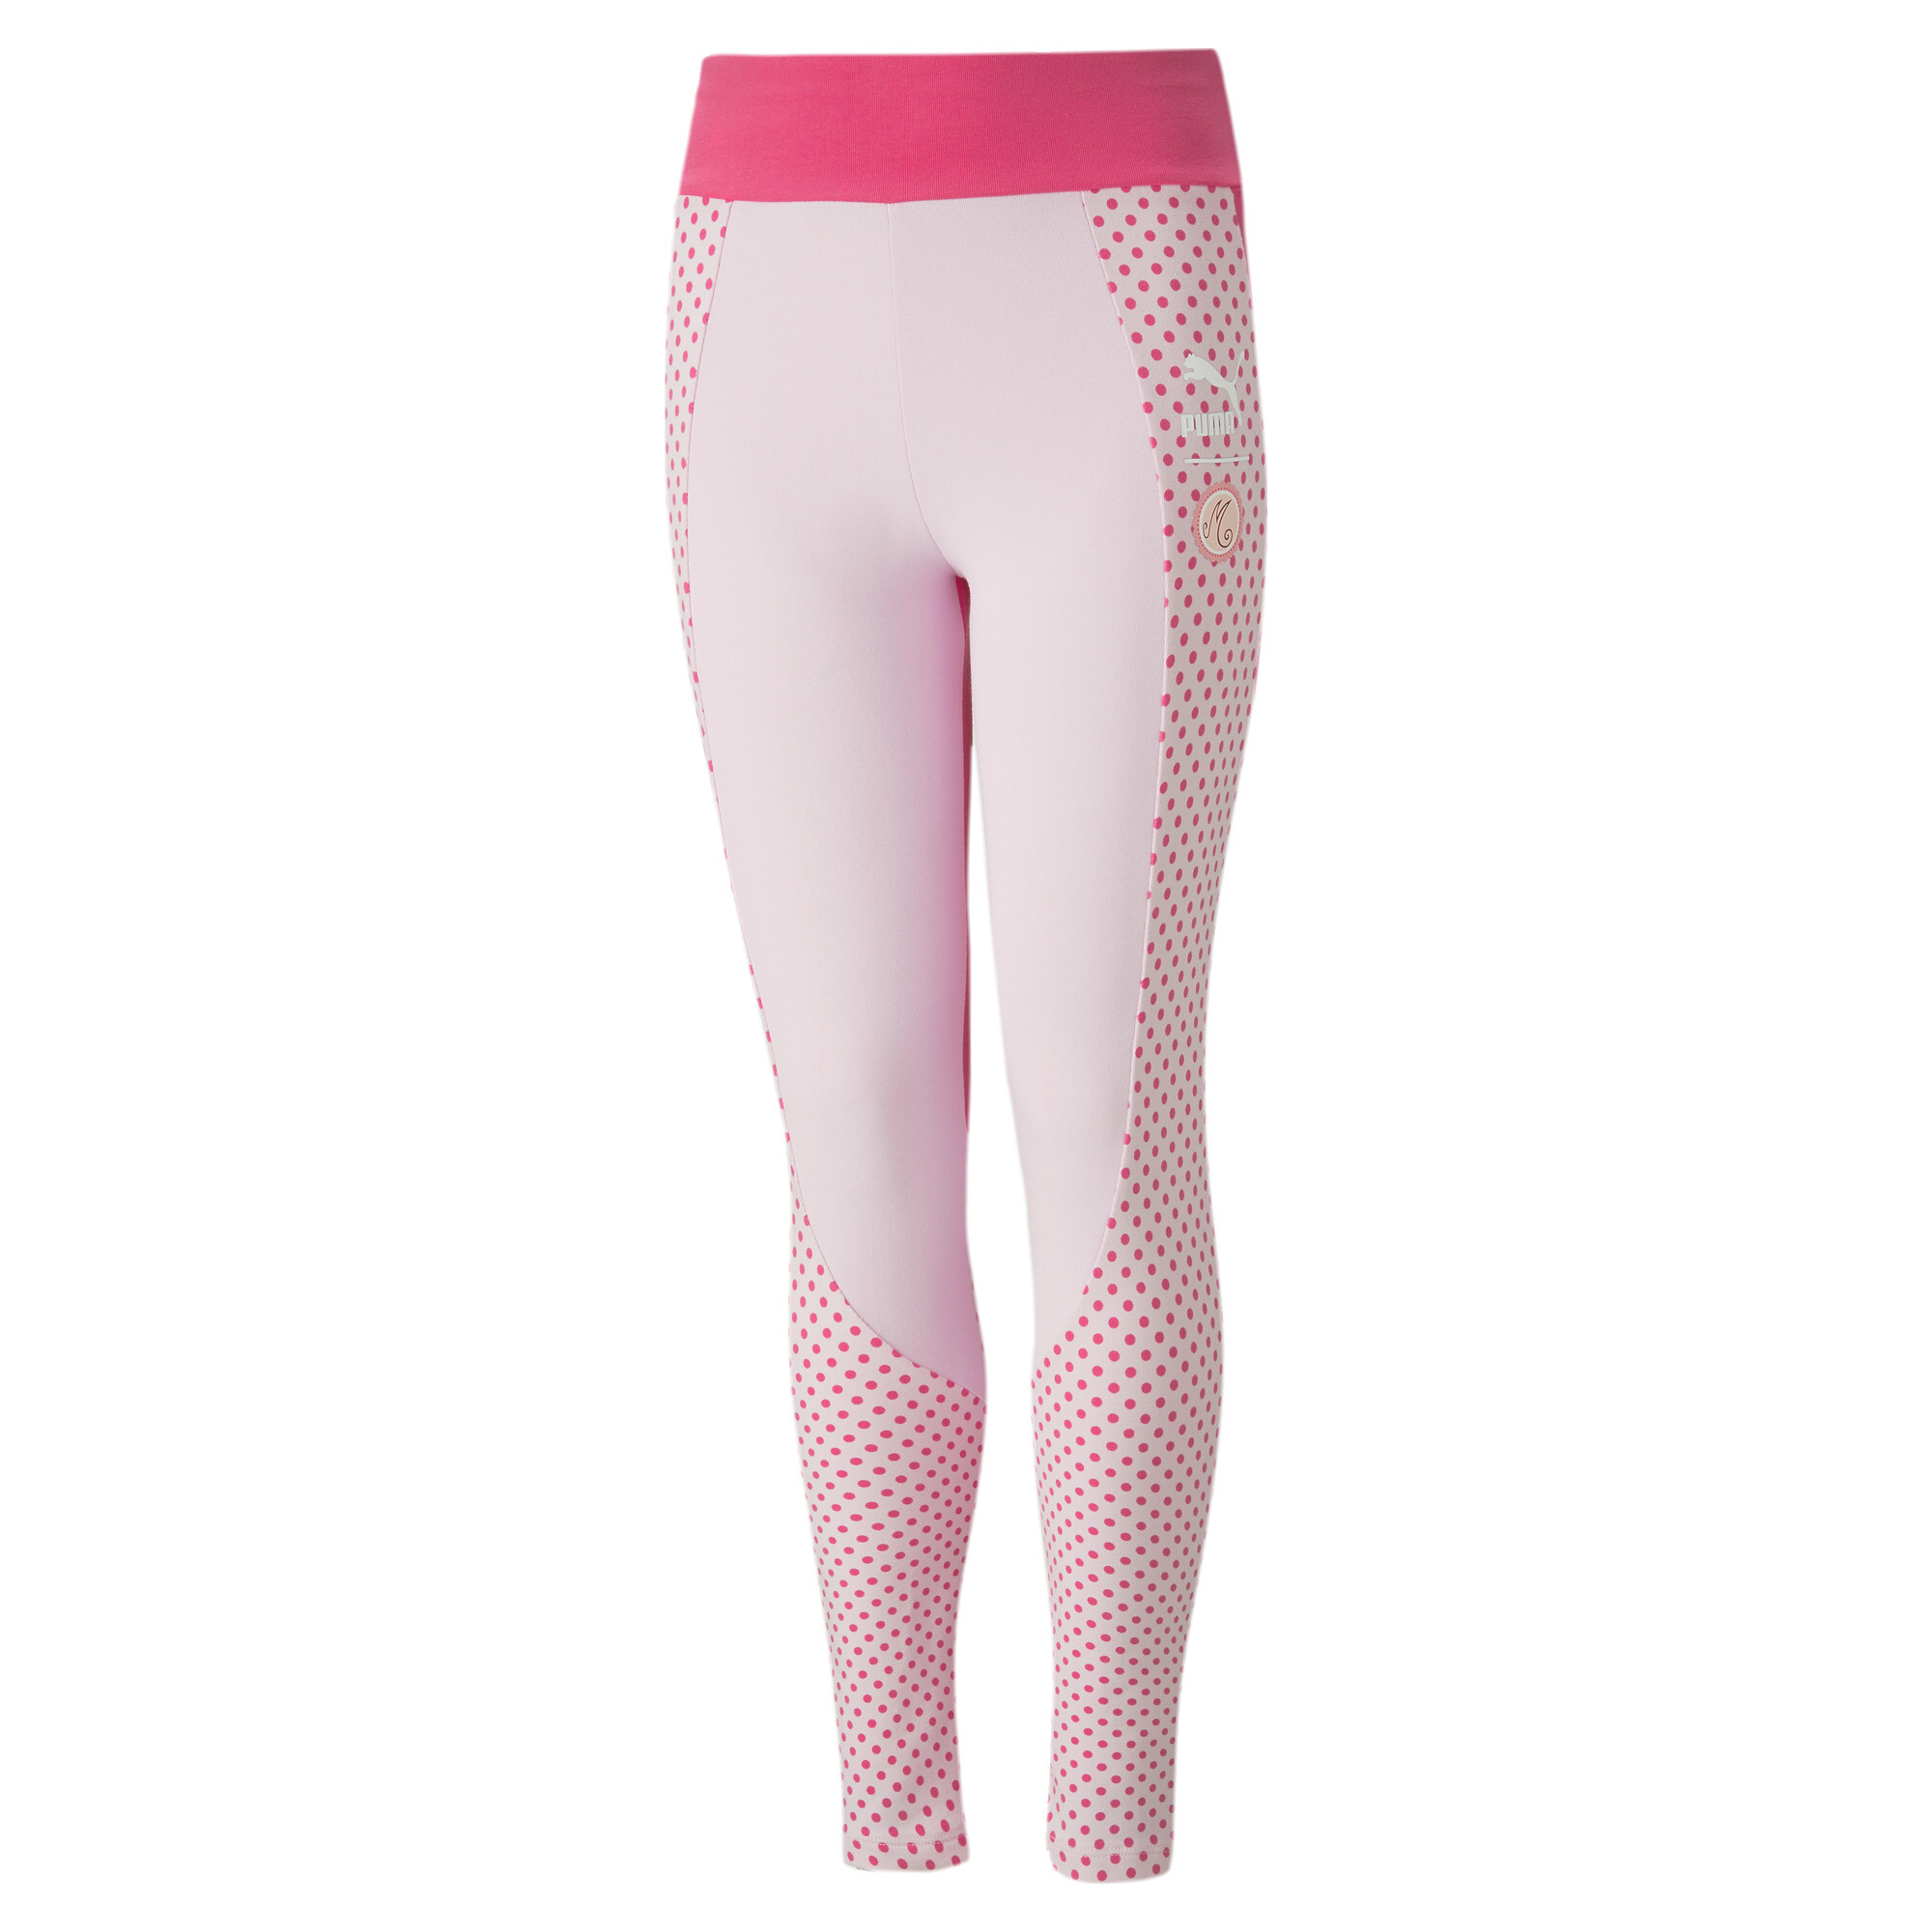 Puma X MIRACULOUS Leggings Youth, Pink, Size 15-16Y, Clothing